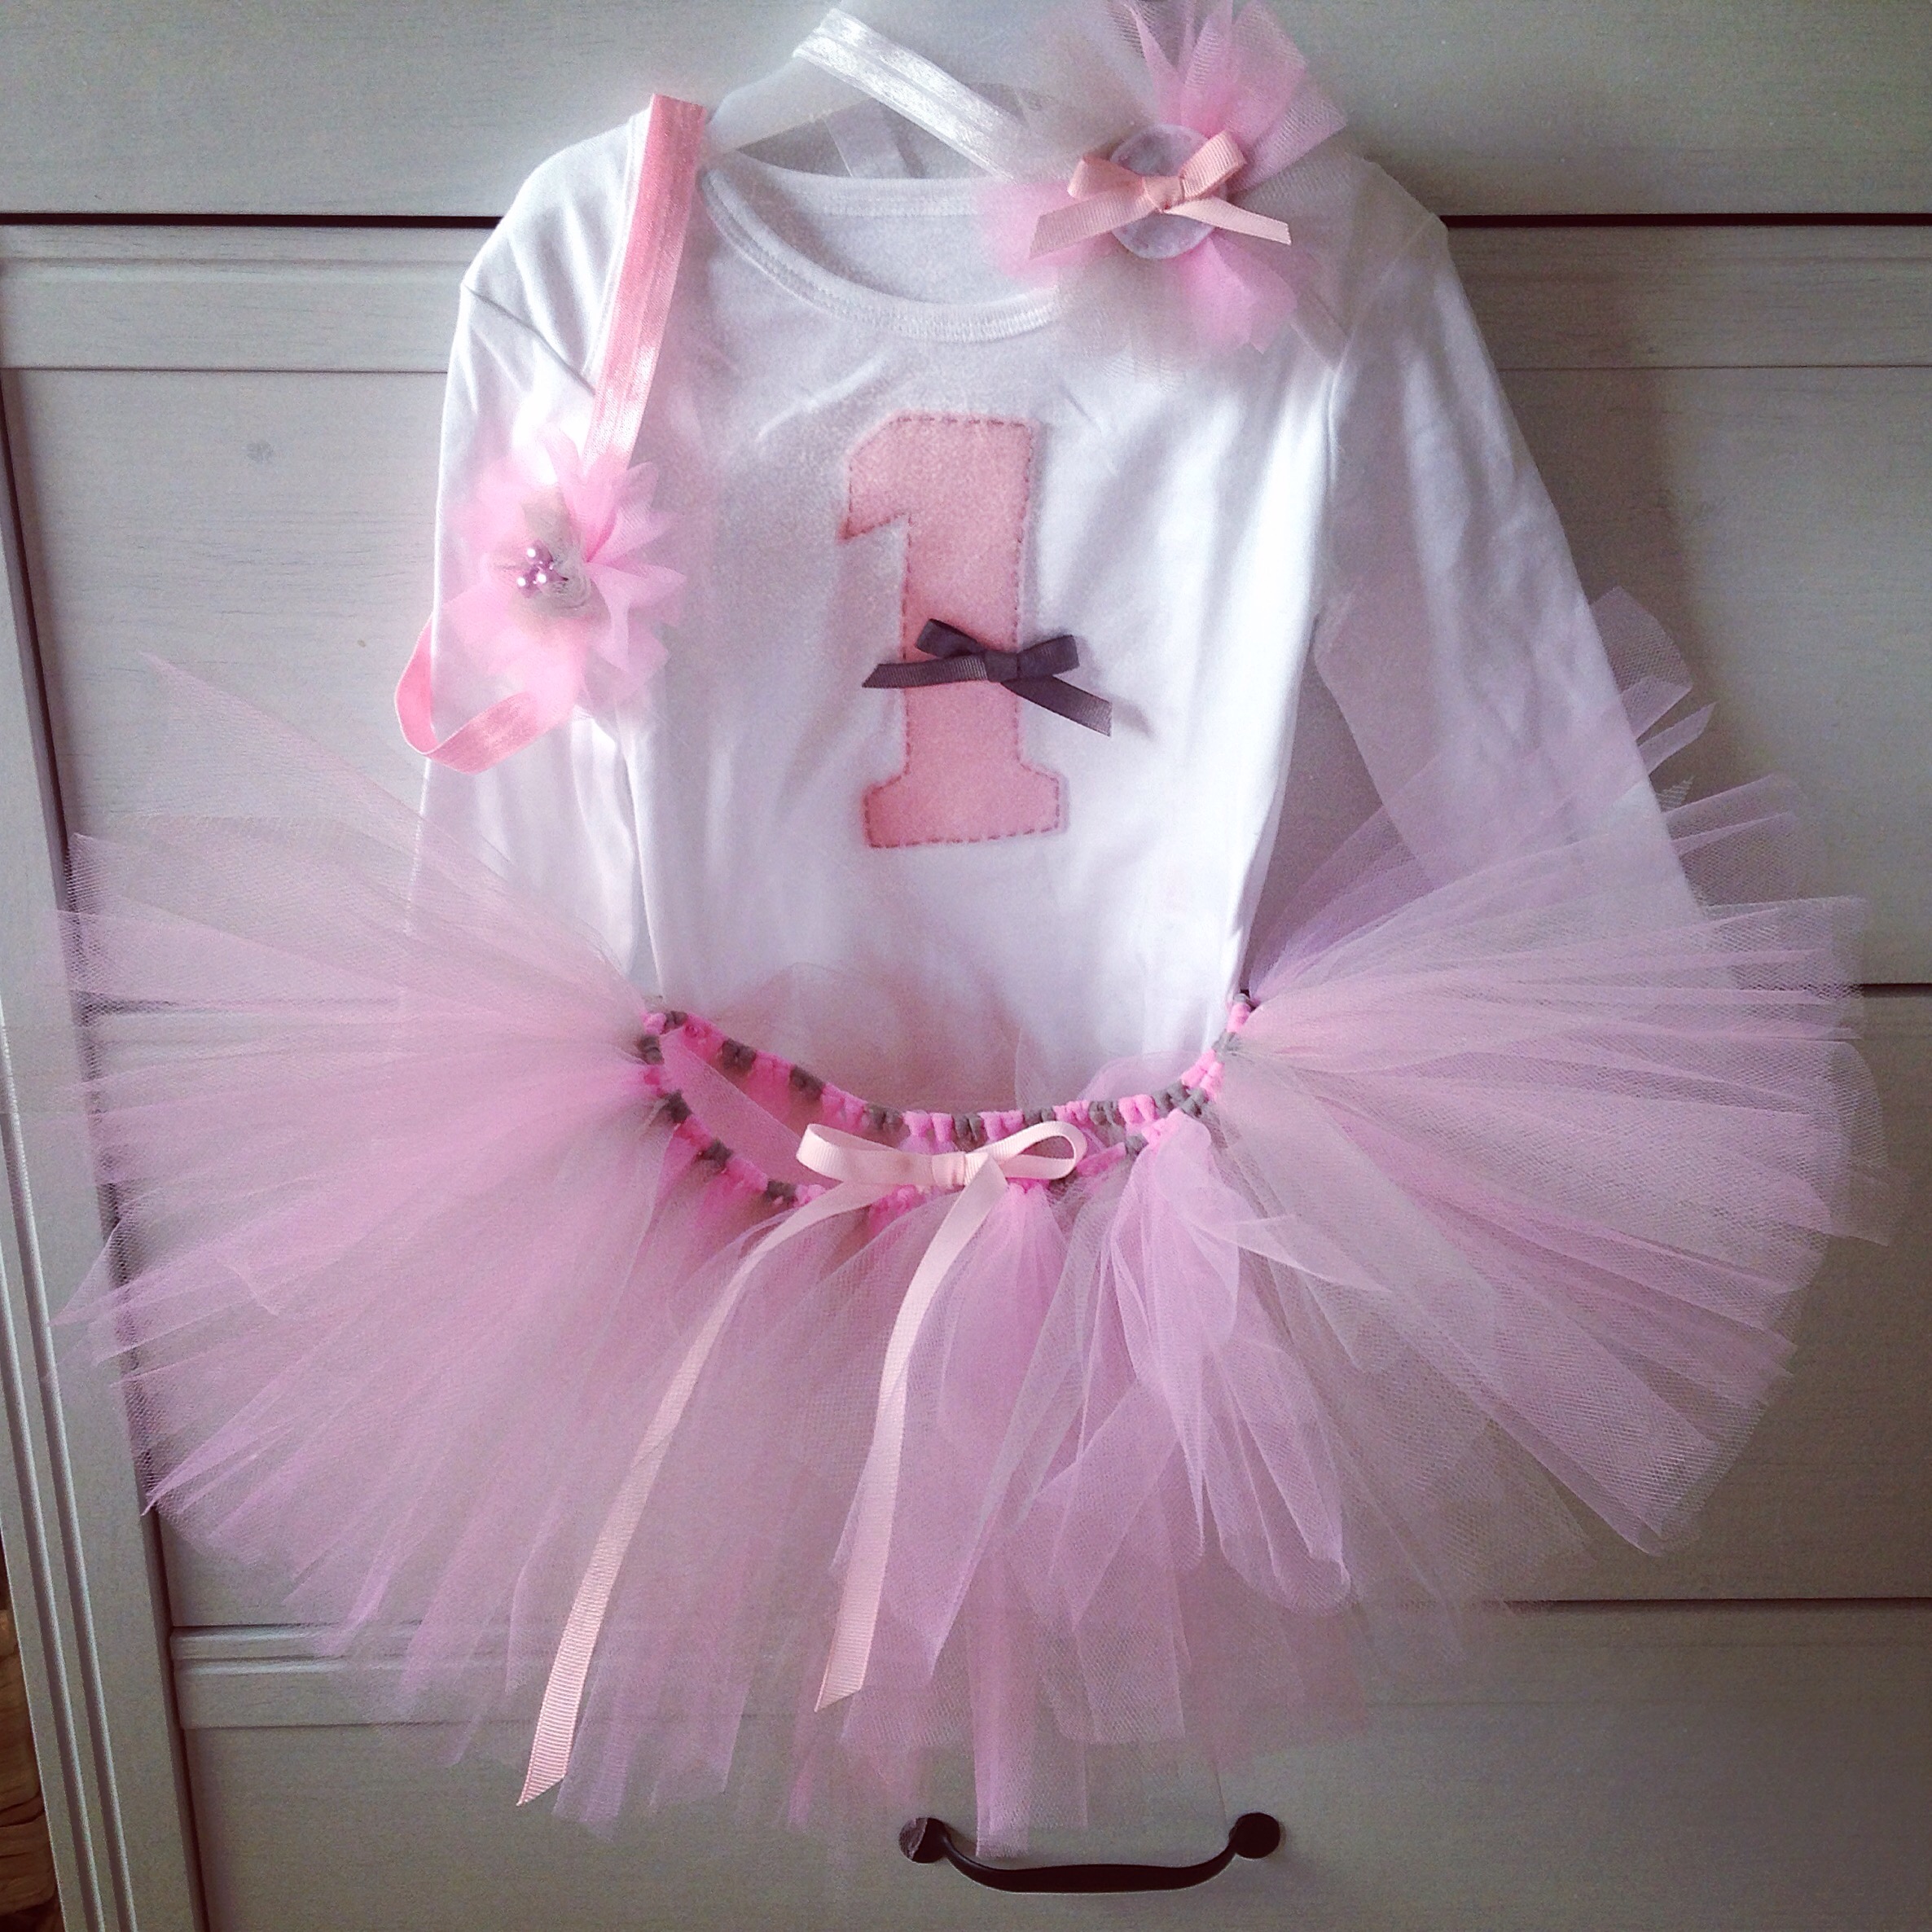 DIY. How to make a Tutu for a girl ❤ also for a baby. Easy, fast